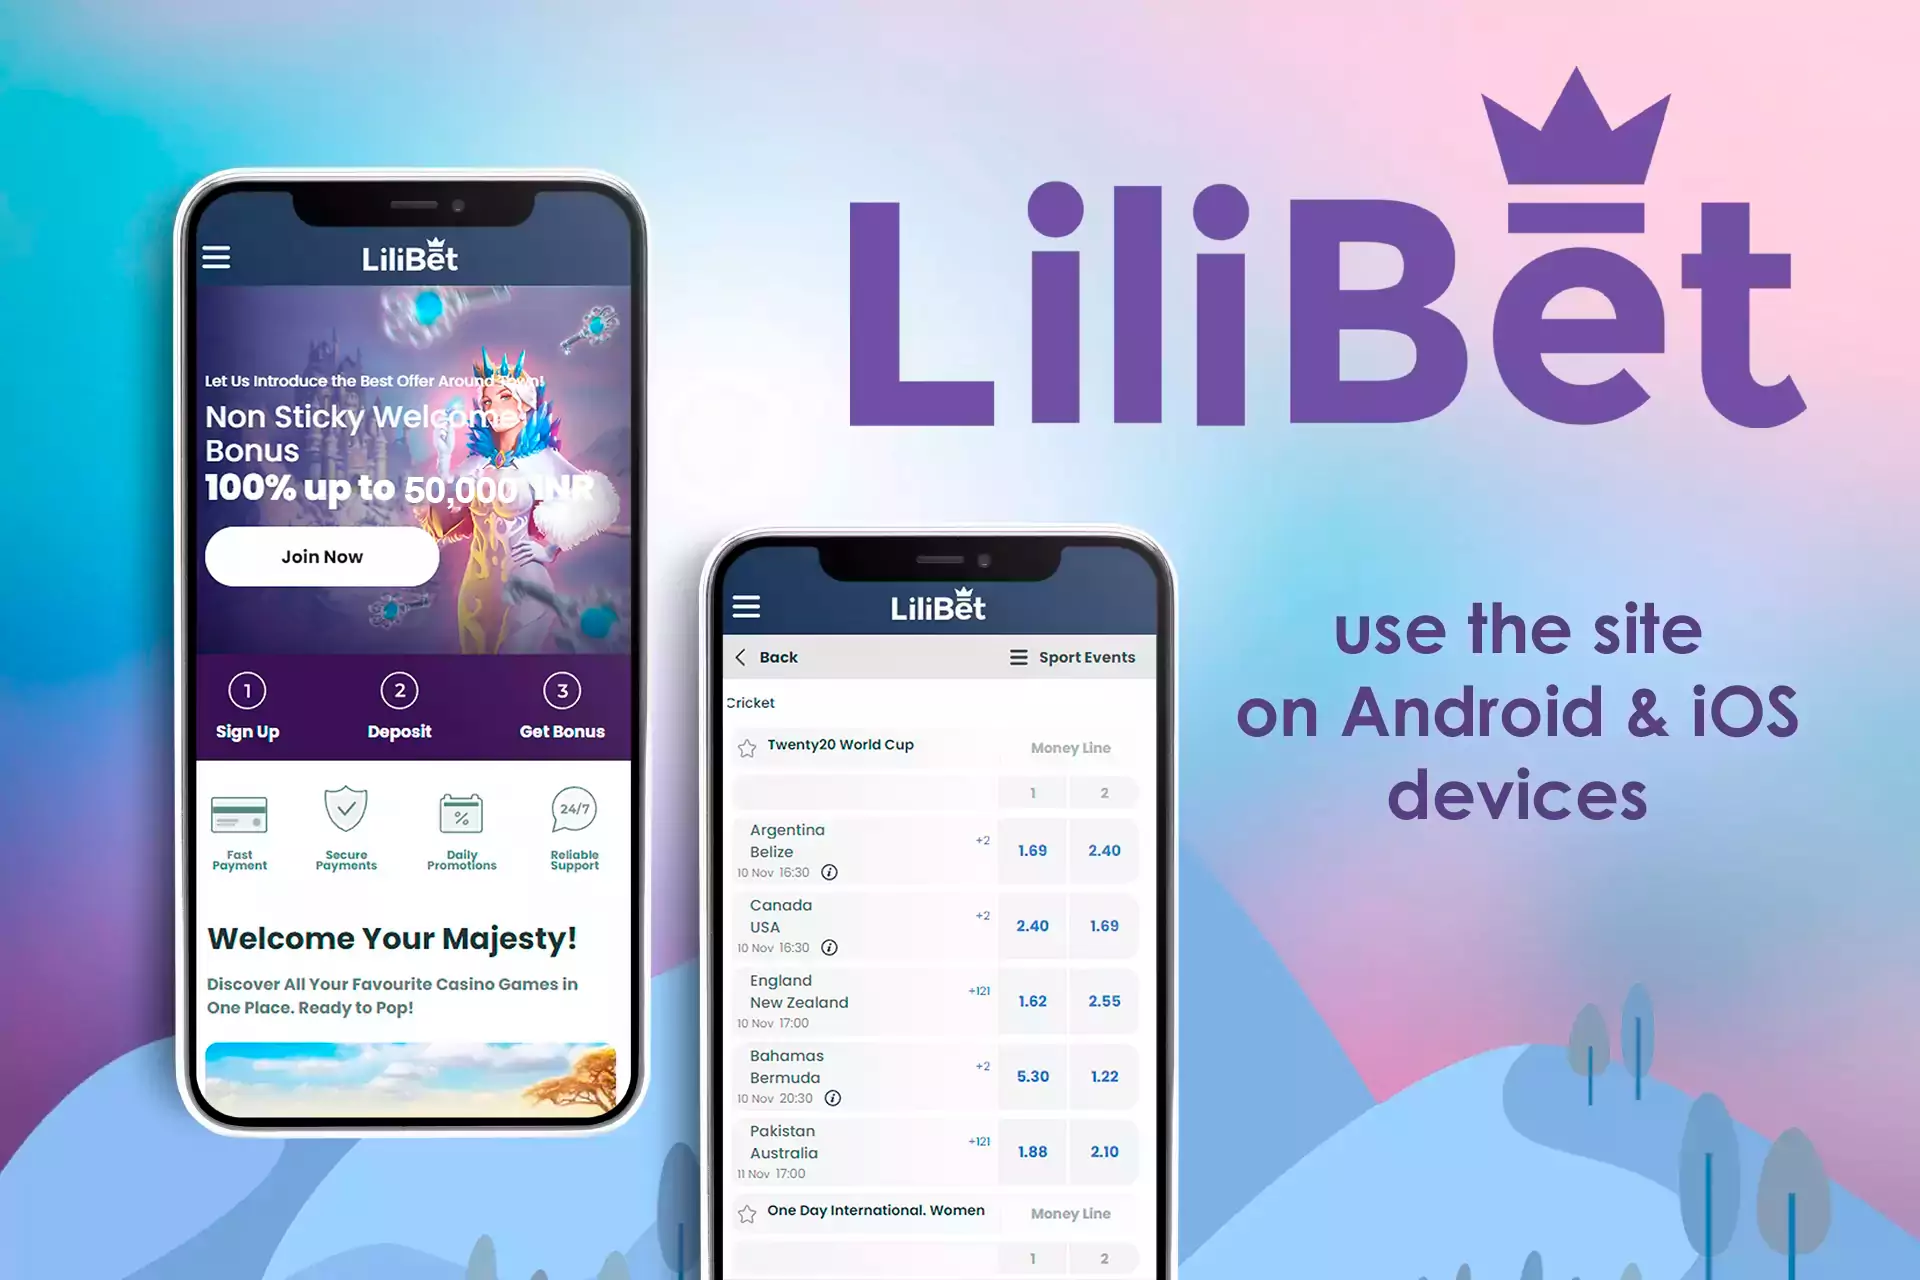 Lilibet has neither Android nor iOS app but you can use the browser version on your smartphone.